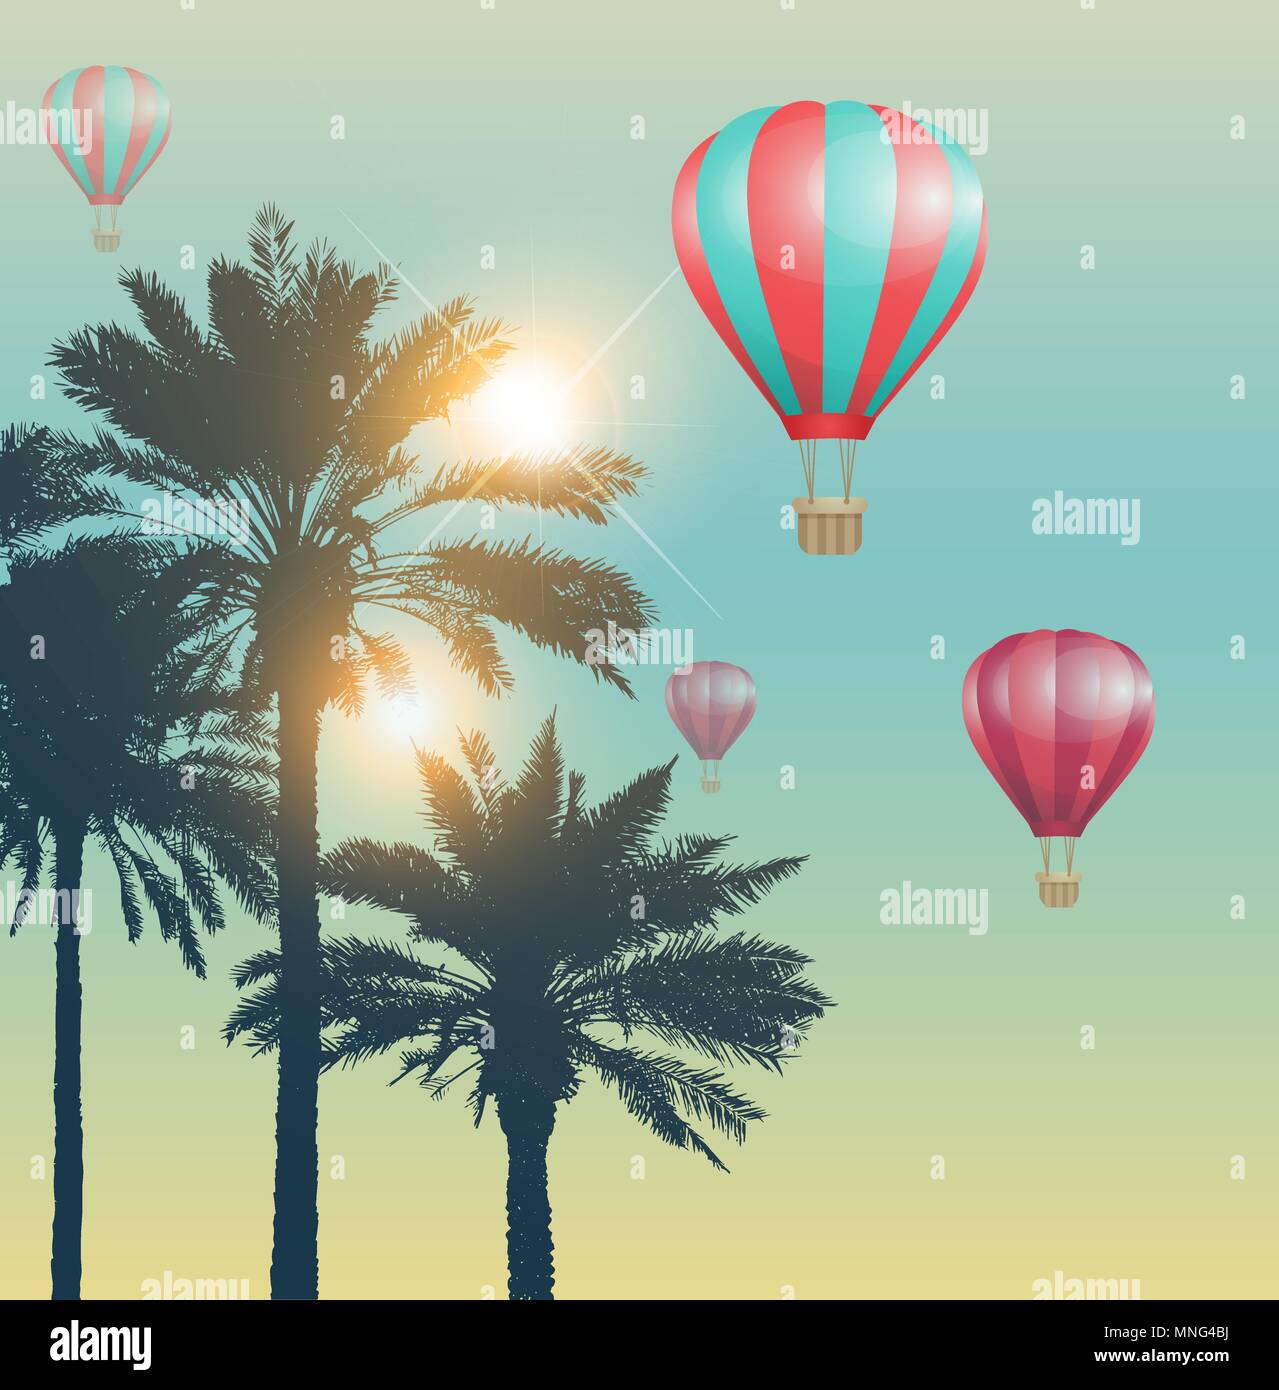 Travel background with red air balloons and palms Stock Vector